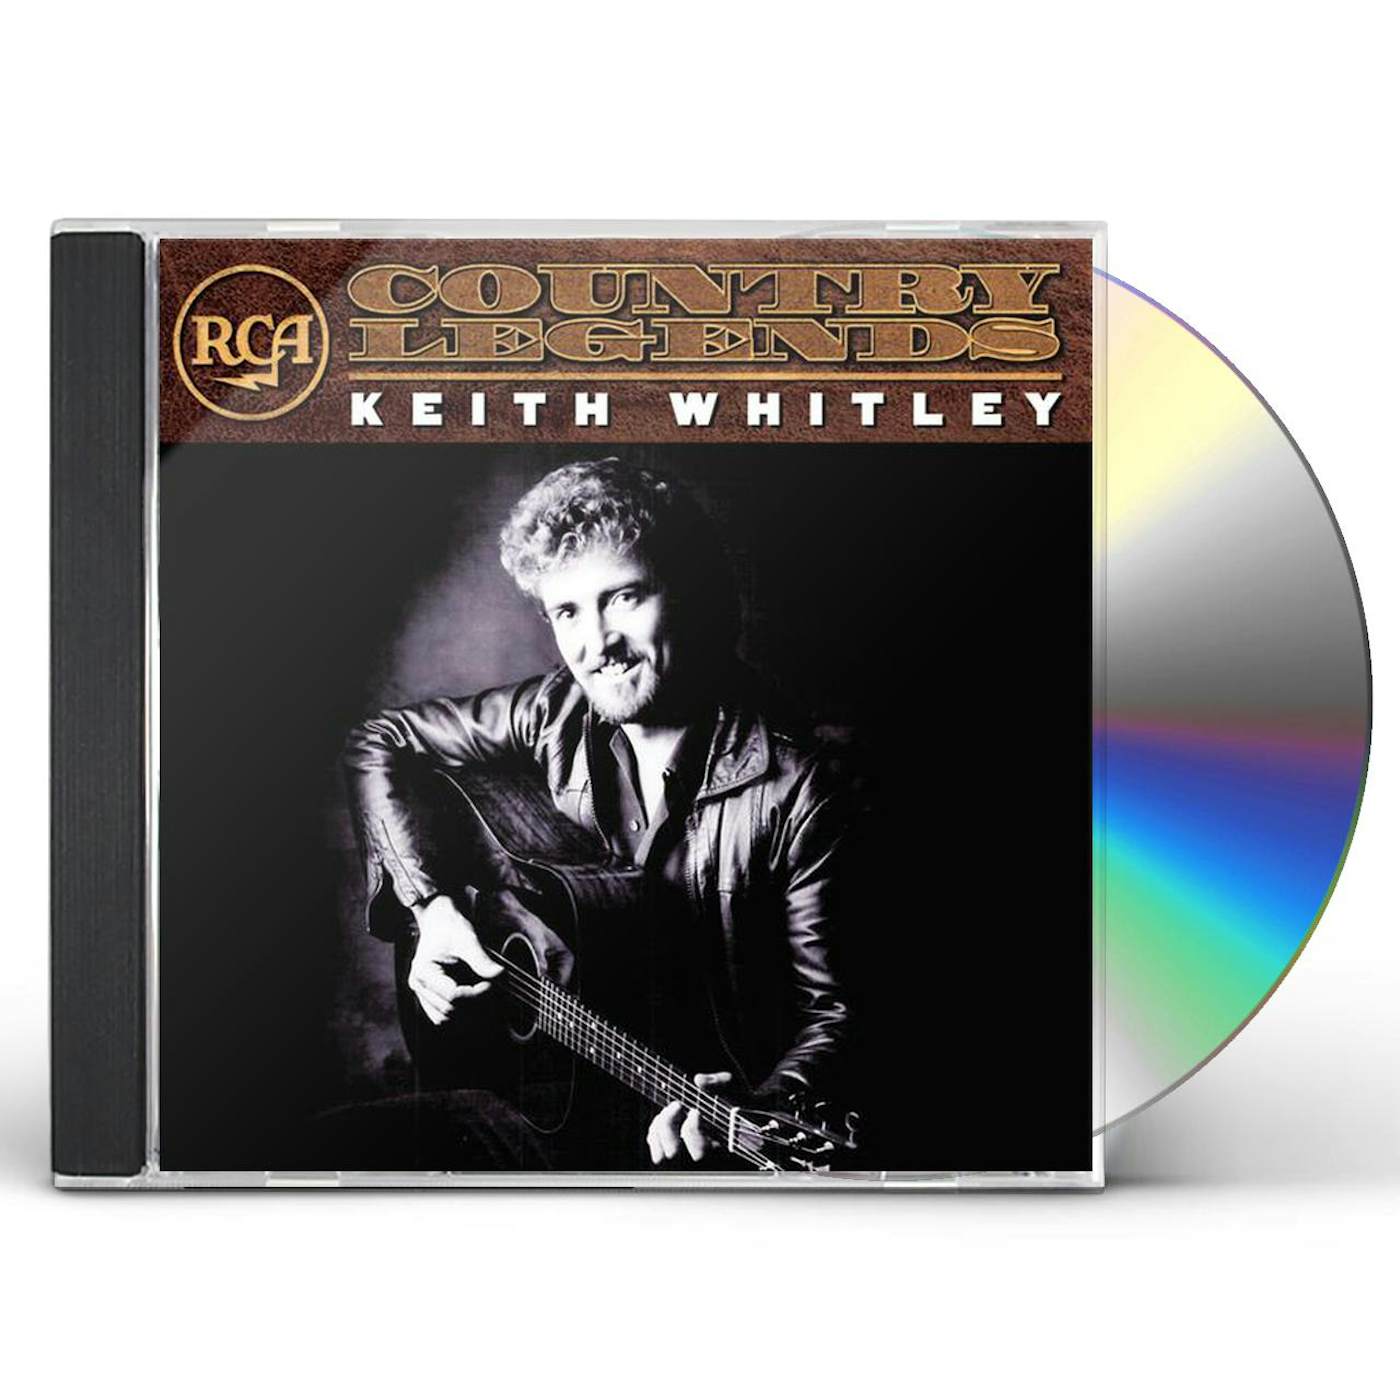 Keith Whitley RCA COUNTRY LEGENDS CD